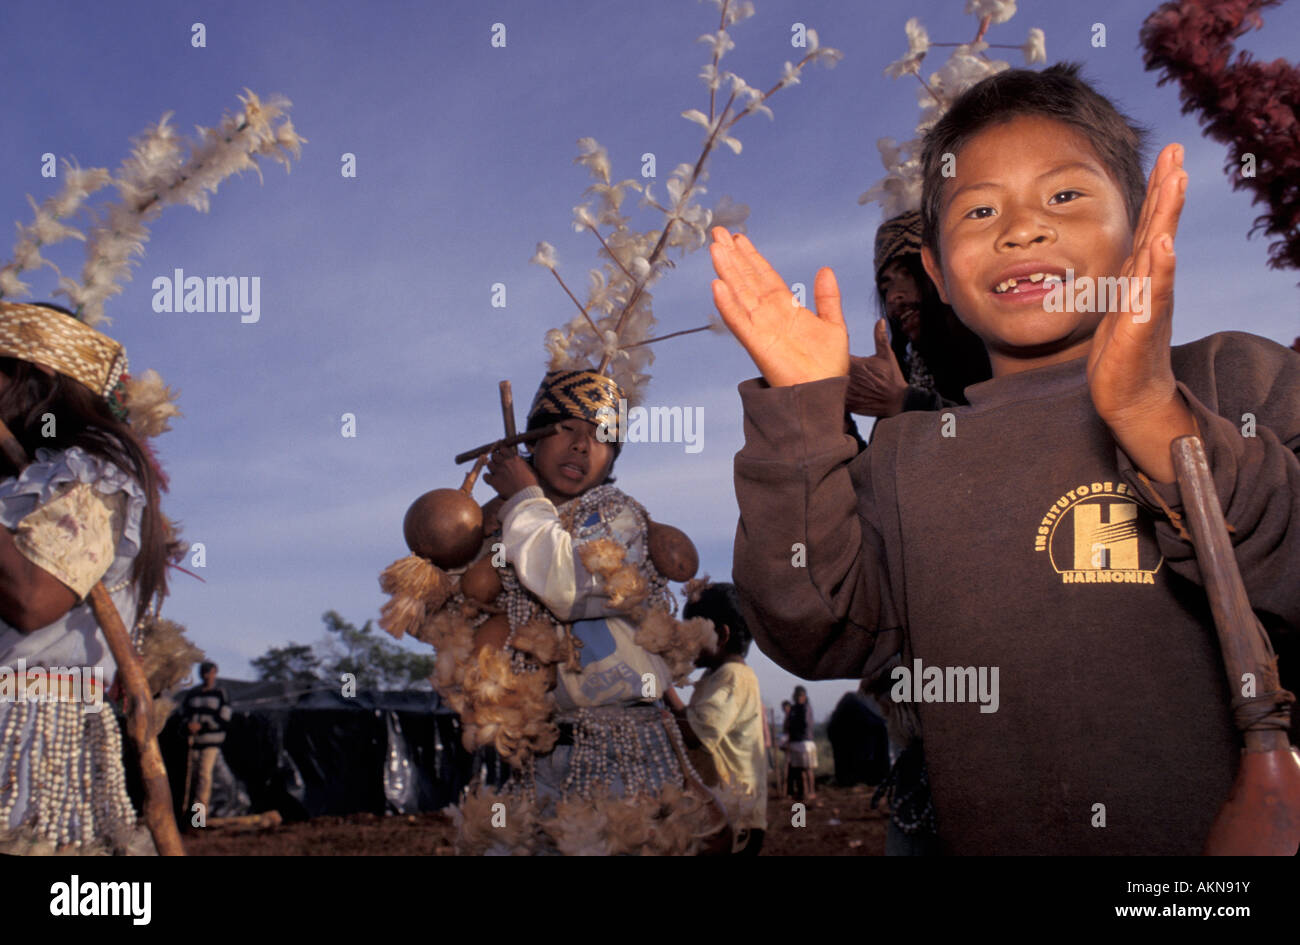 Guarani Kaiowas indigenous people Children participating in religious rituals and traditional dancing Celebration Stock Photo